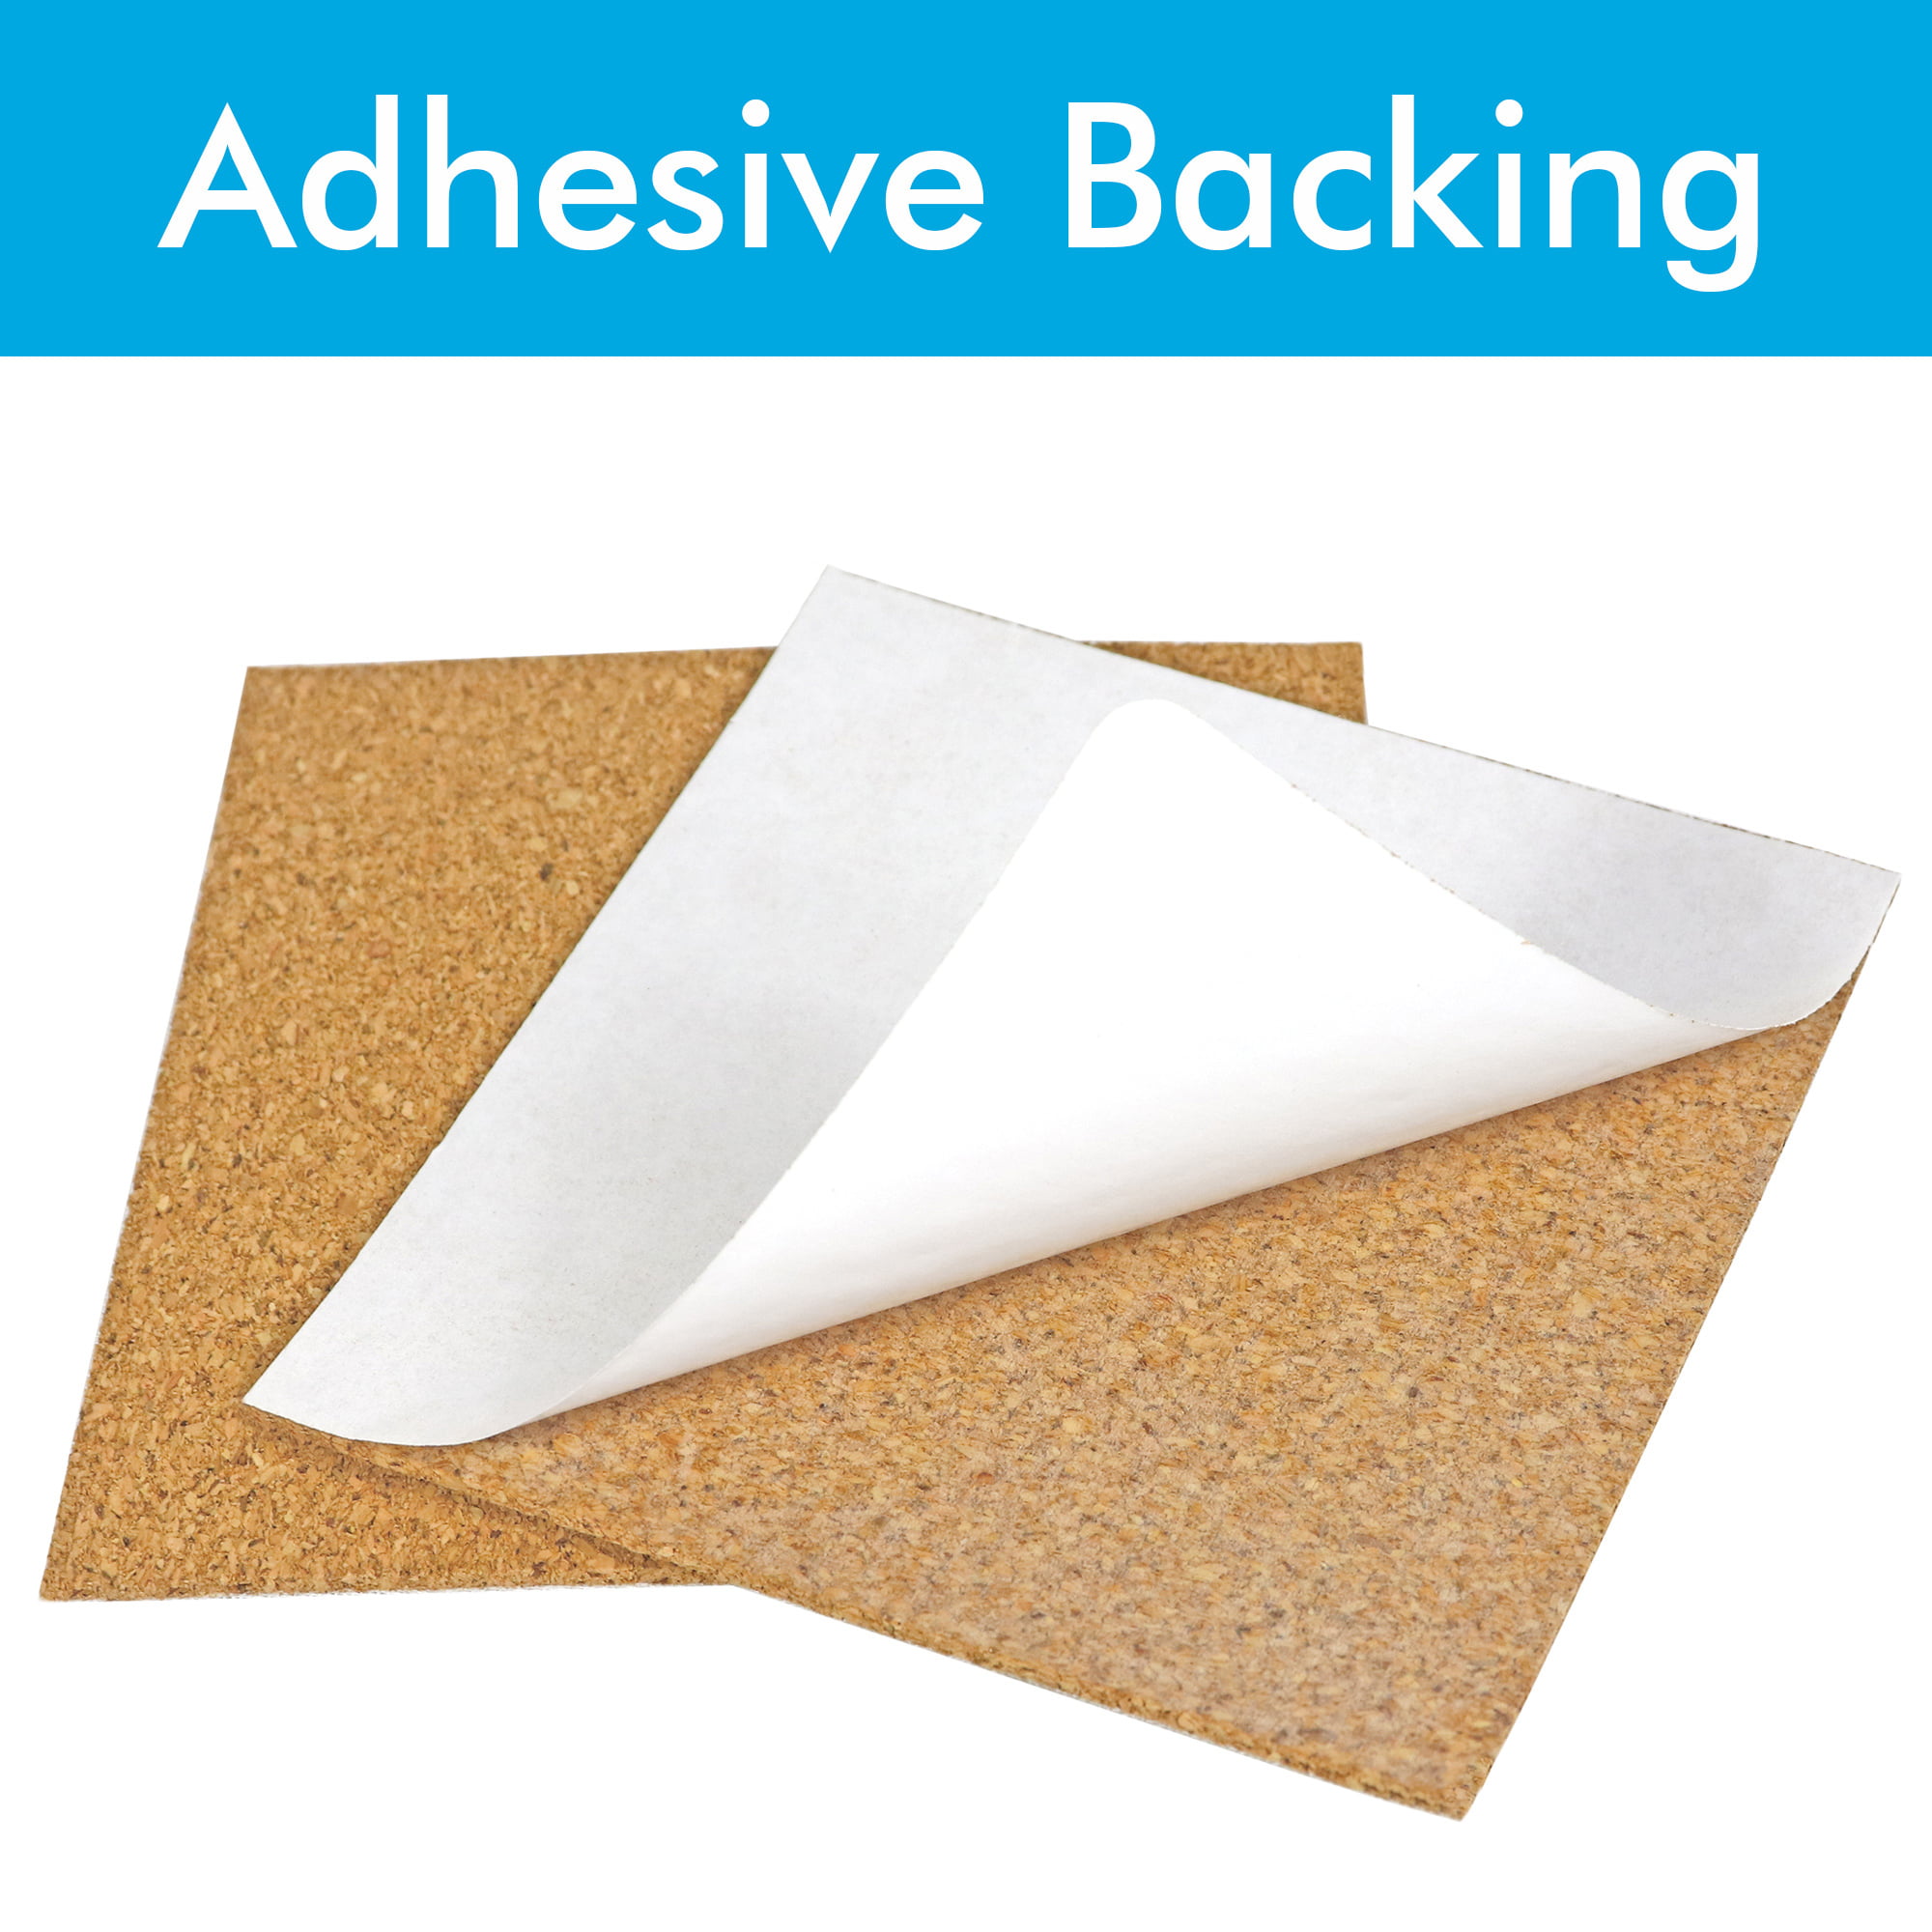 30 Pack Self-Adhesive Cork Squares 4” x 4” Cork Tiles Cok Bcking Sheets Cork Coasters Square for DIY Crafts 